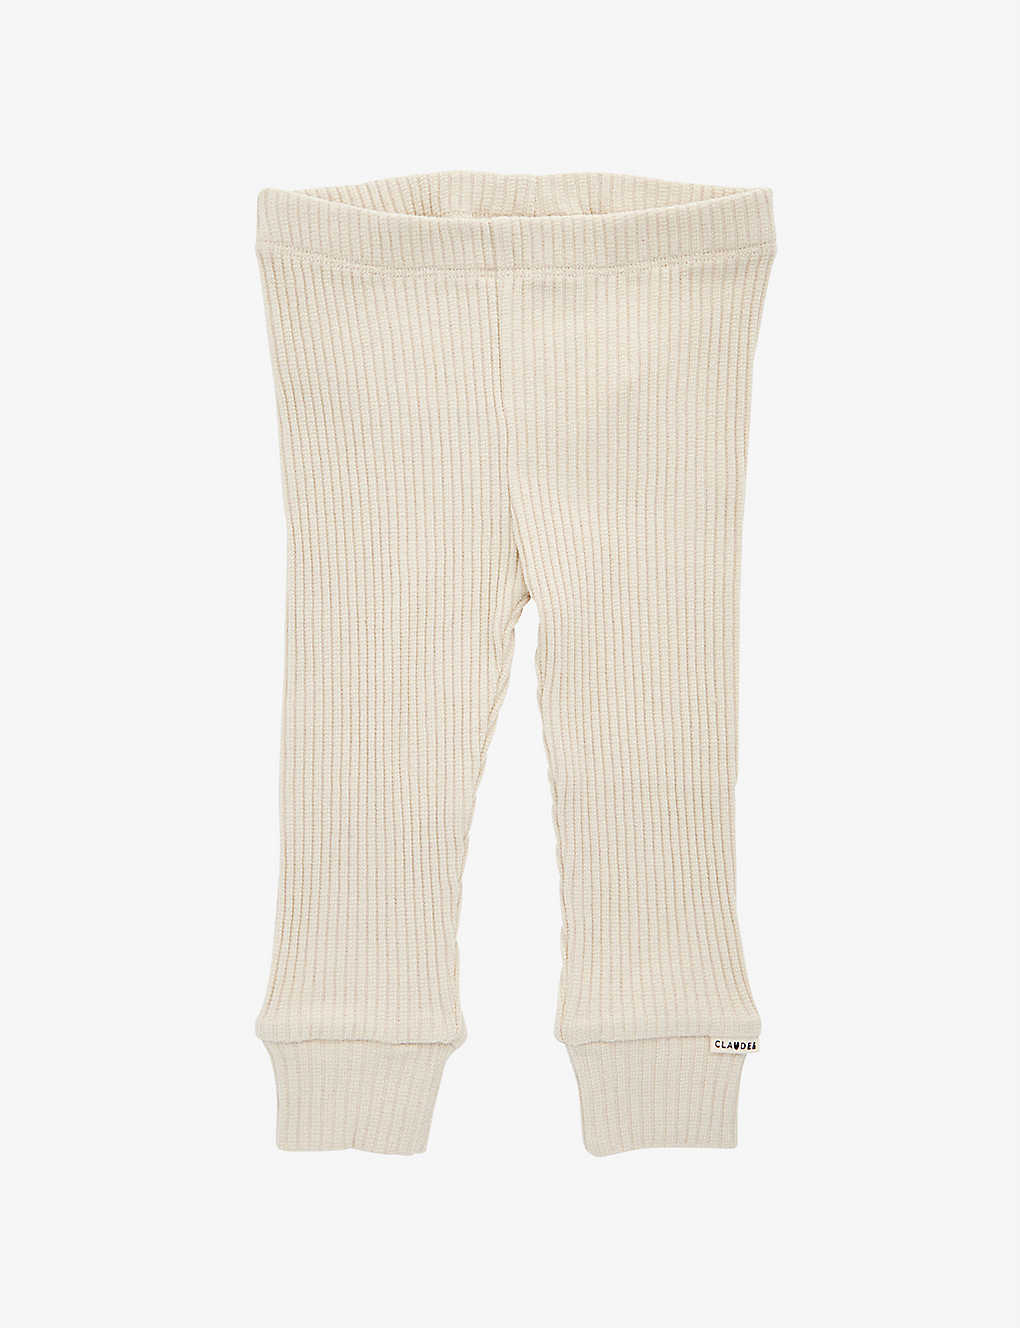 Claude & Co. Babies' Ribbed Cuffed Organic Cotton-blend Leggings 0-12 Months In Oat